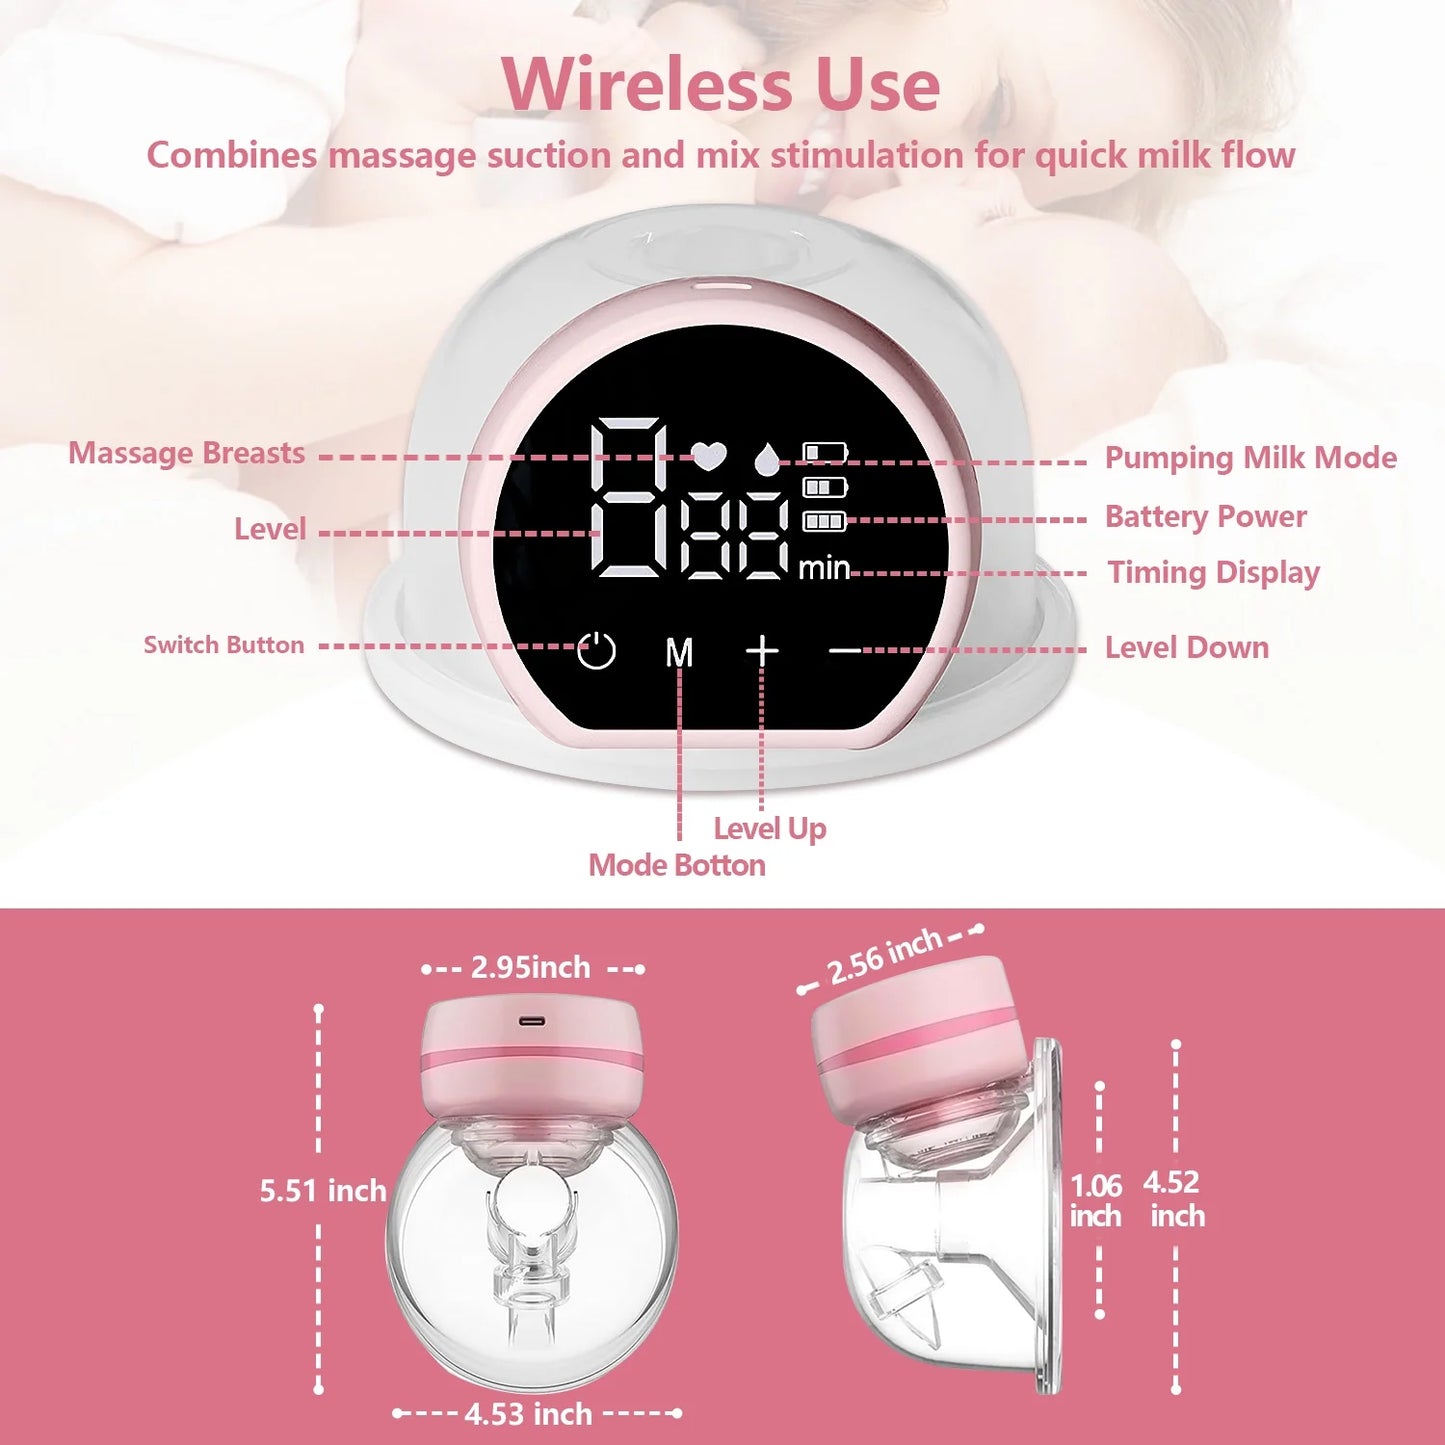 Electric Breast Pump,  Wearable Breast Pump, Hands-Free Breast Pumps with 3 Modes, 9 Levels, Pink